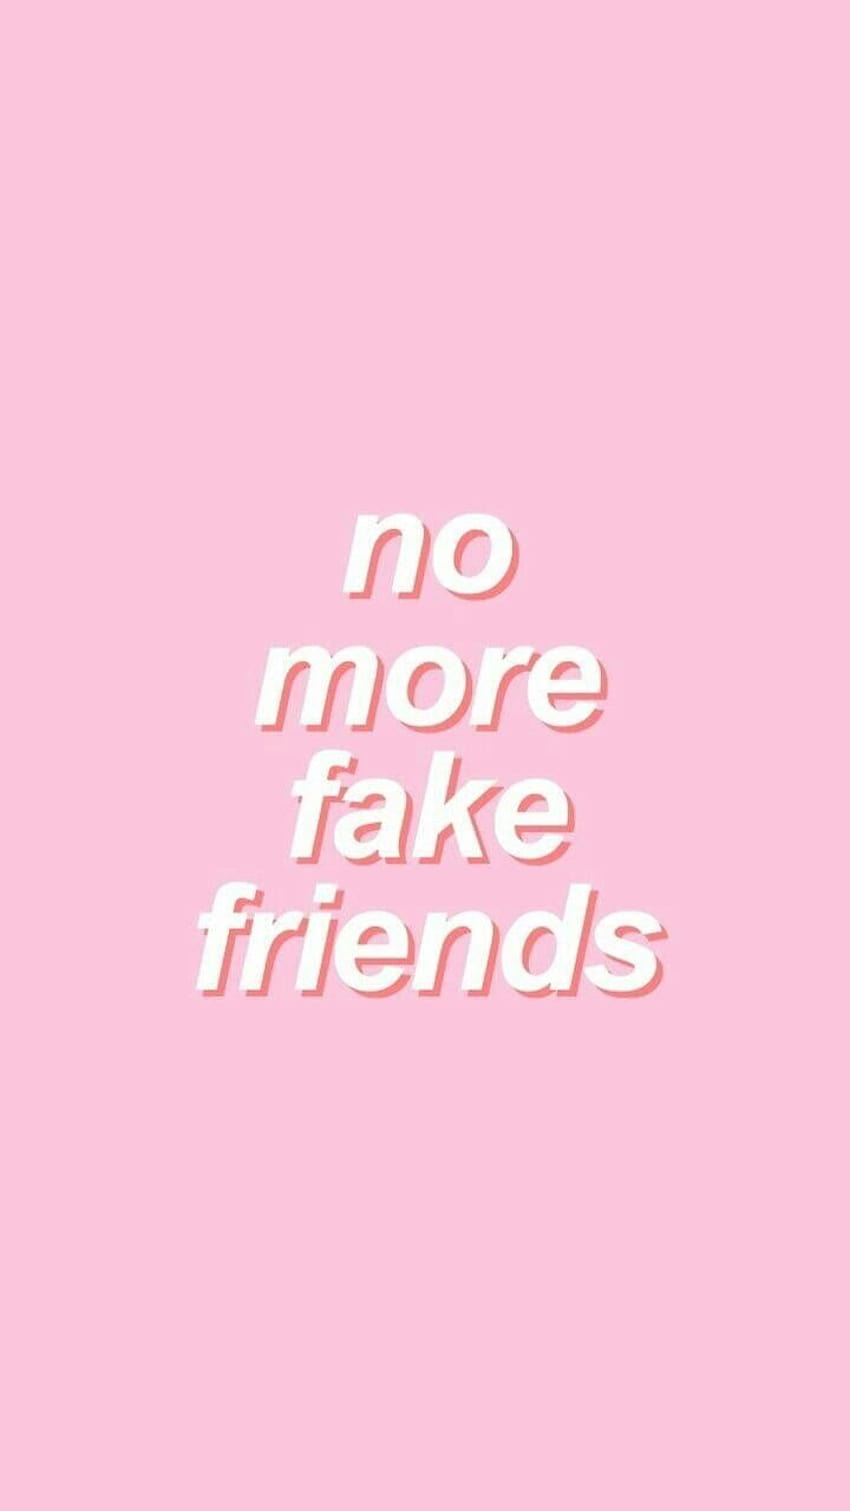 150 Fake Friends Quotes  Fake People Sayings with Images  Fake friend  quotes Fake friendship quotes Quotes about real friends